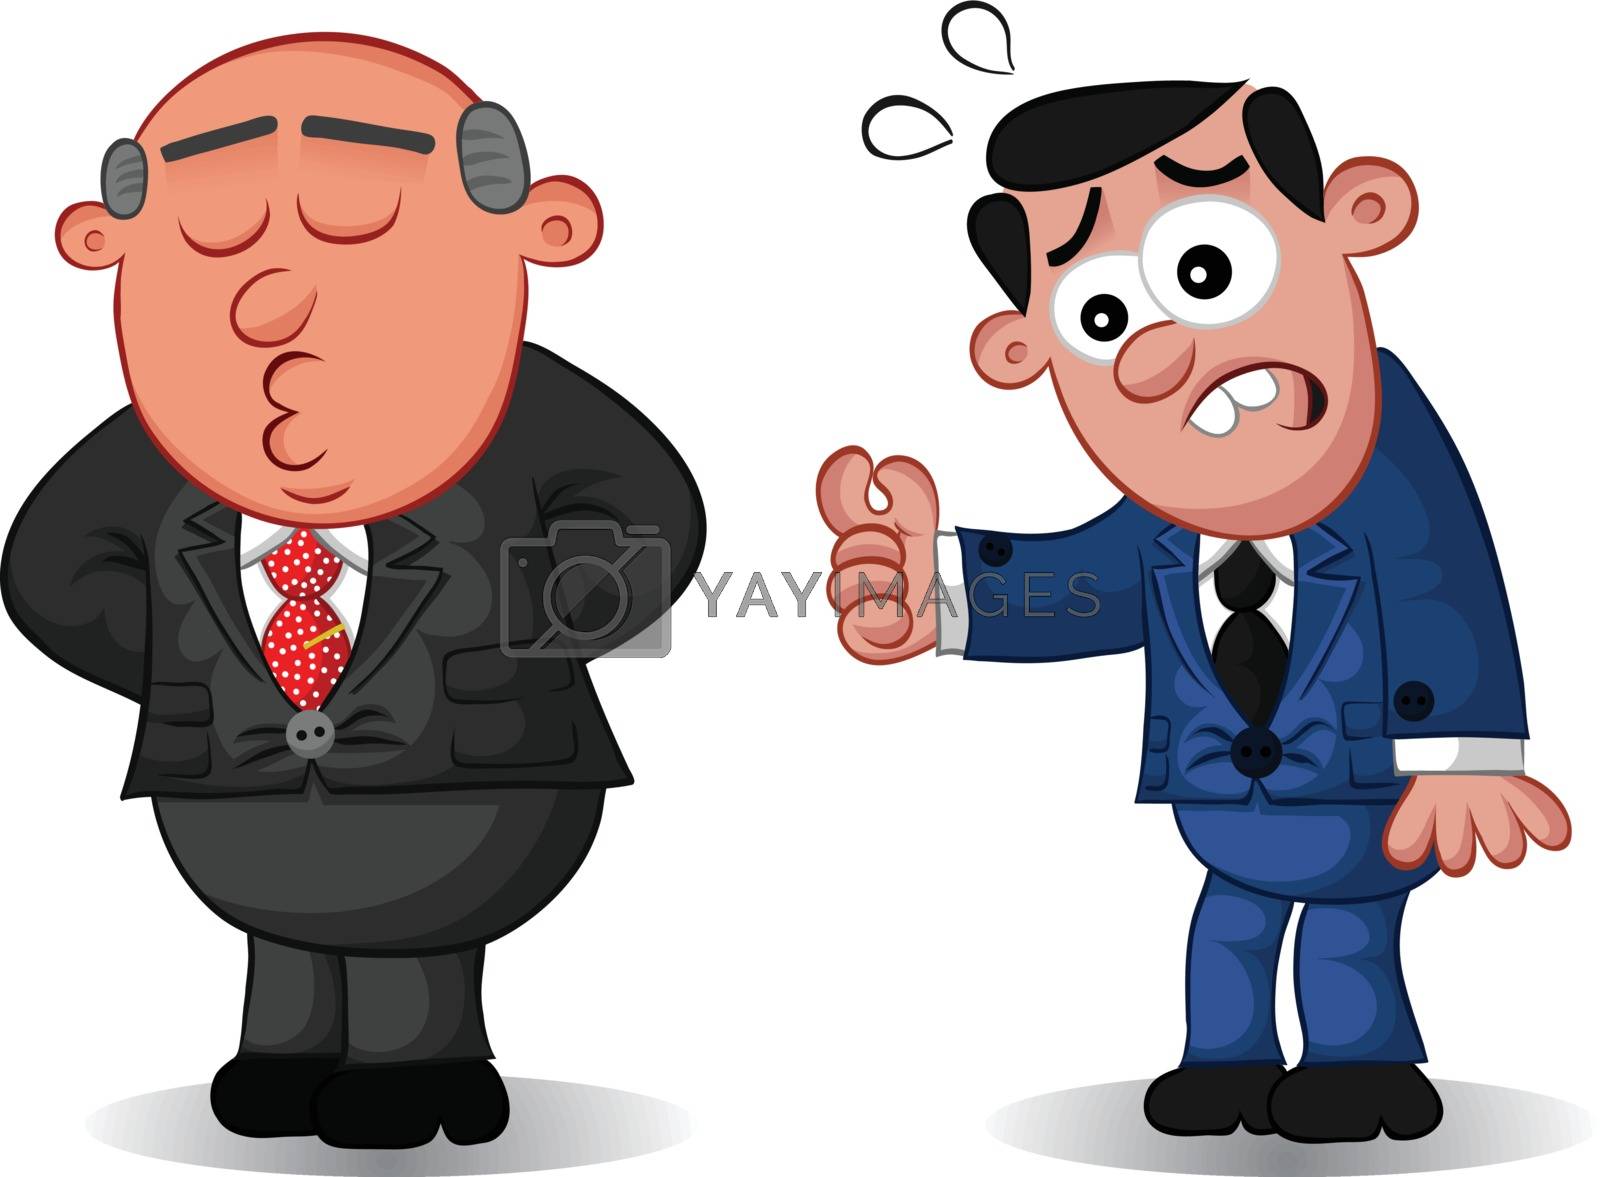 Royalty Free Vector | Business Cartoon - Boss Man Doesn't Listen to Employee  by emrahavci